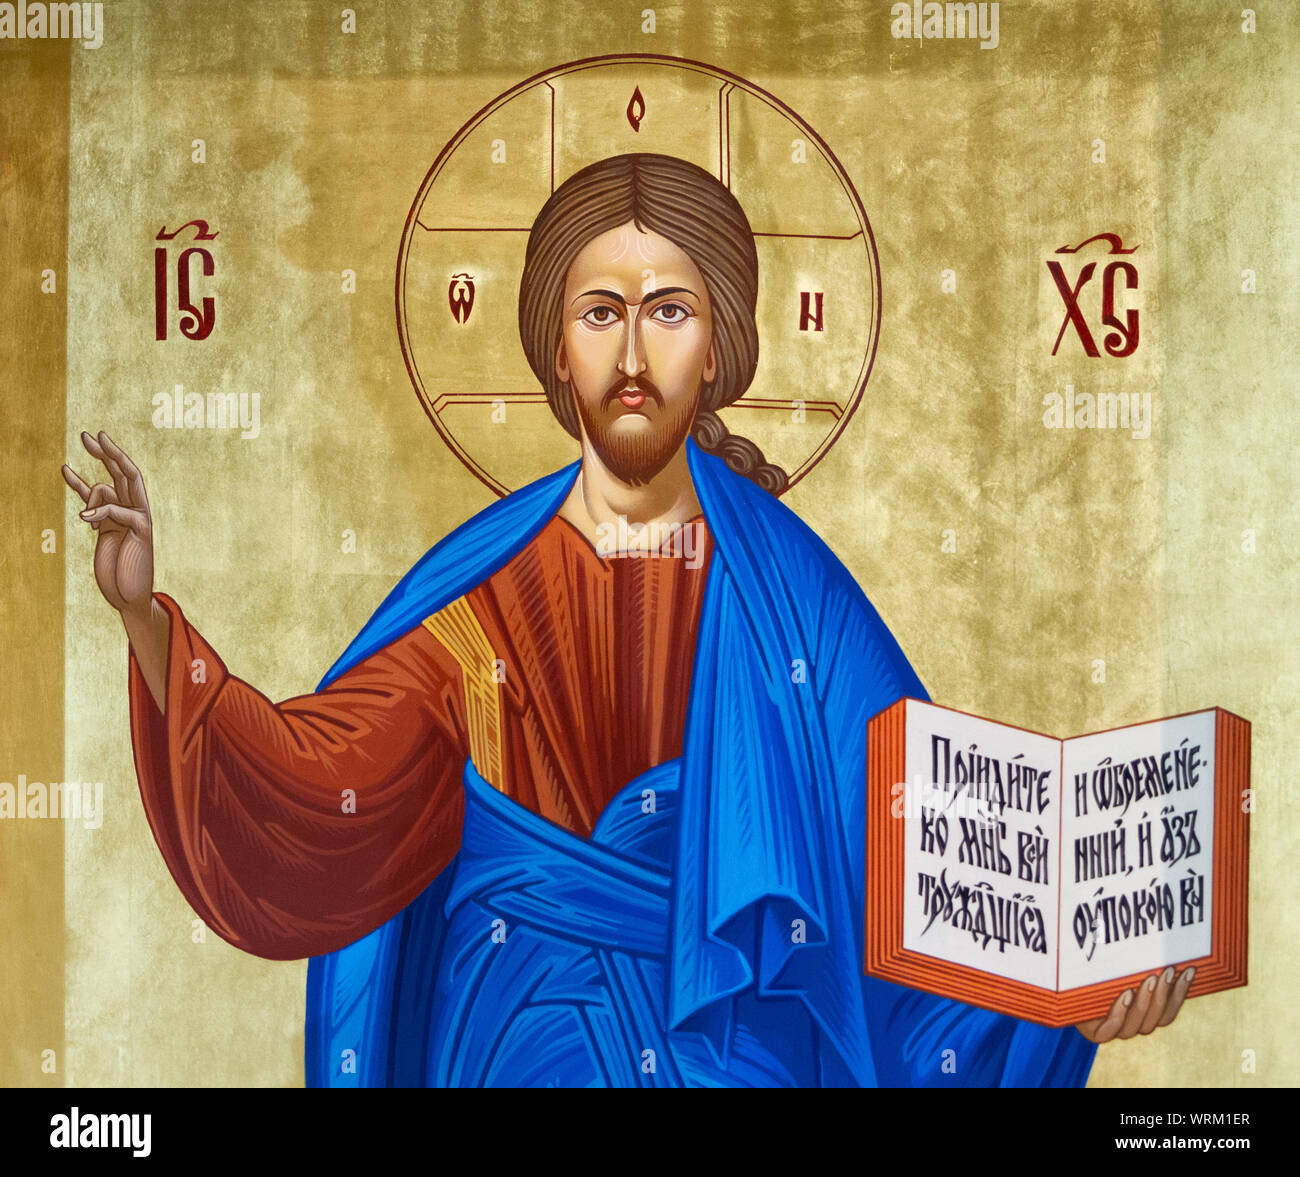 The icon of the Christ Pantocrator (Christ 'Almighty' or 'All-powerful' or 'Ruler of All' or 'Sustainer of the World'). The church of Saint Elijah. Stock Photo